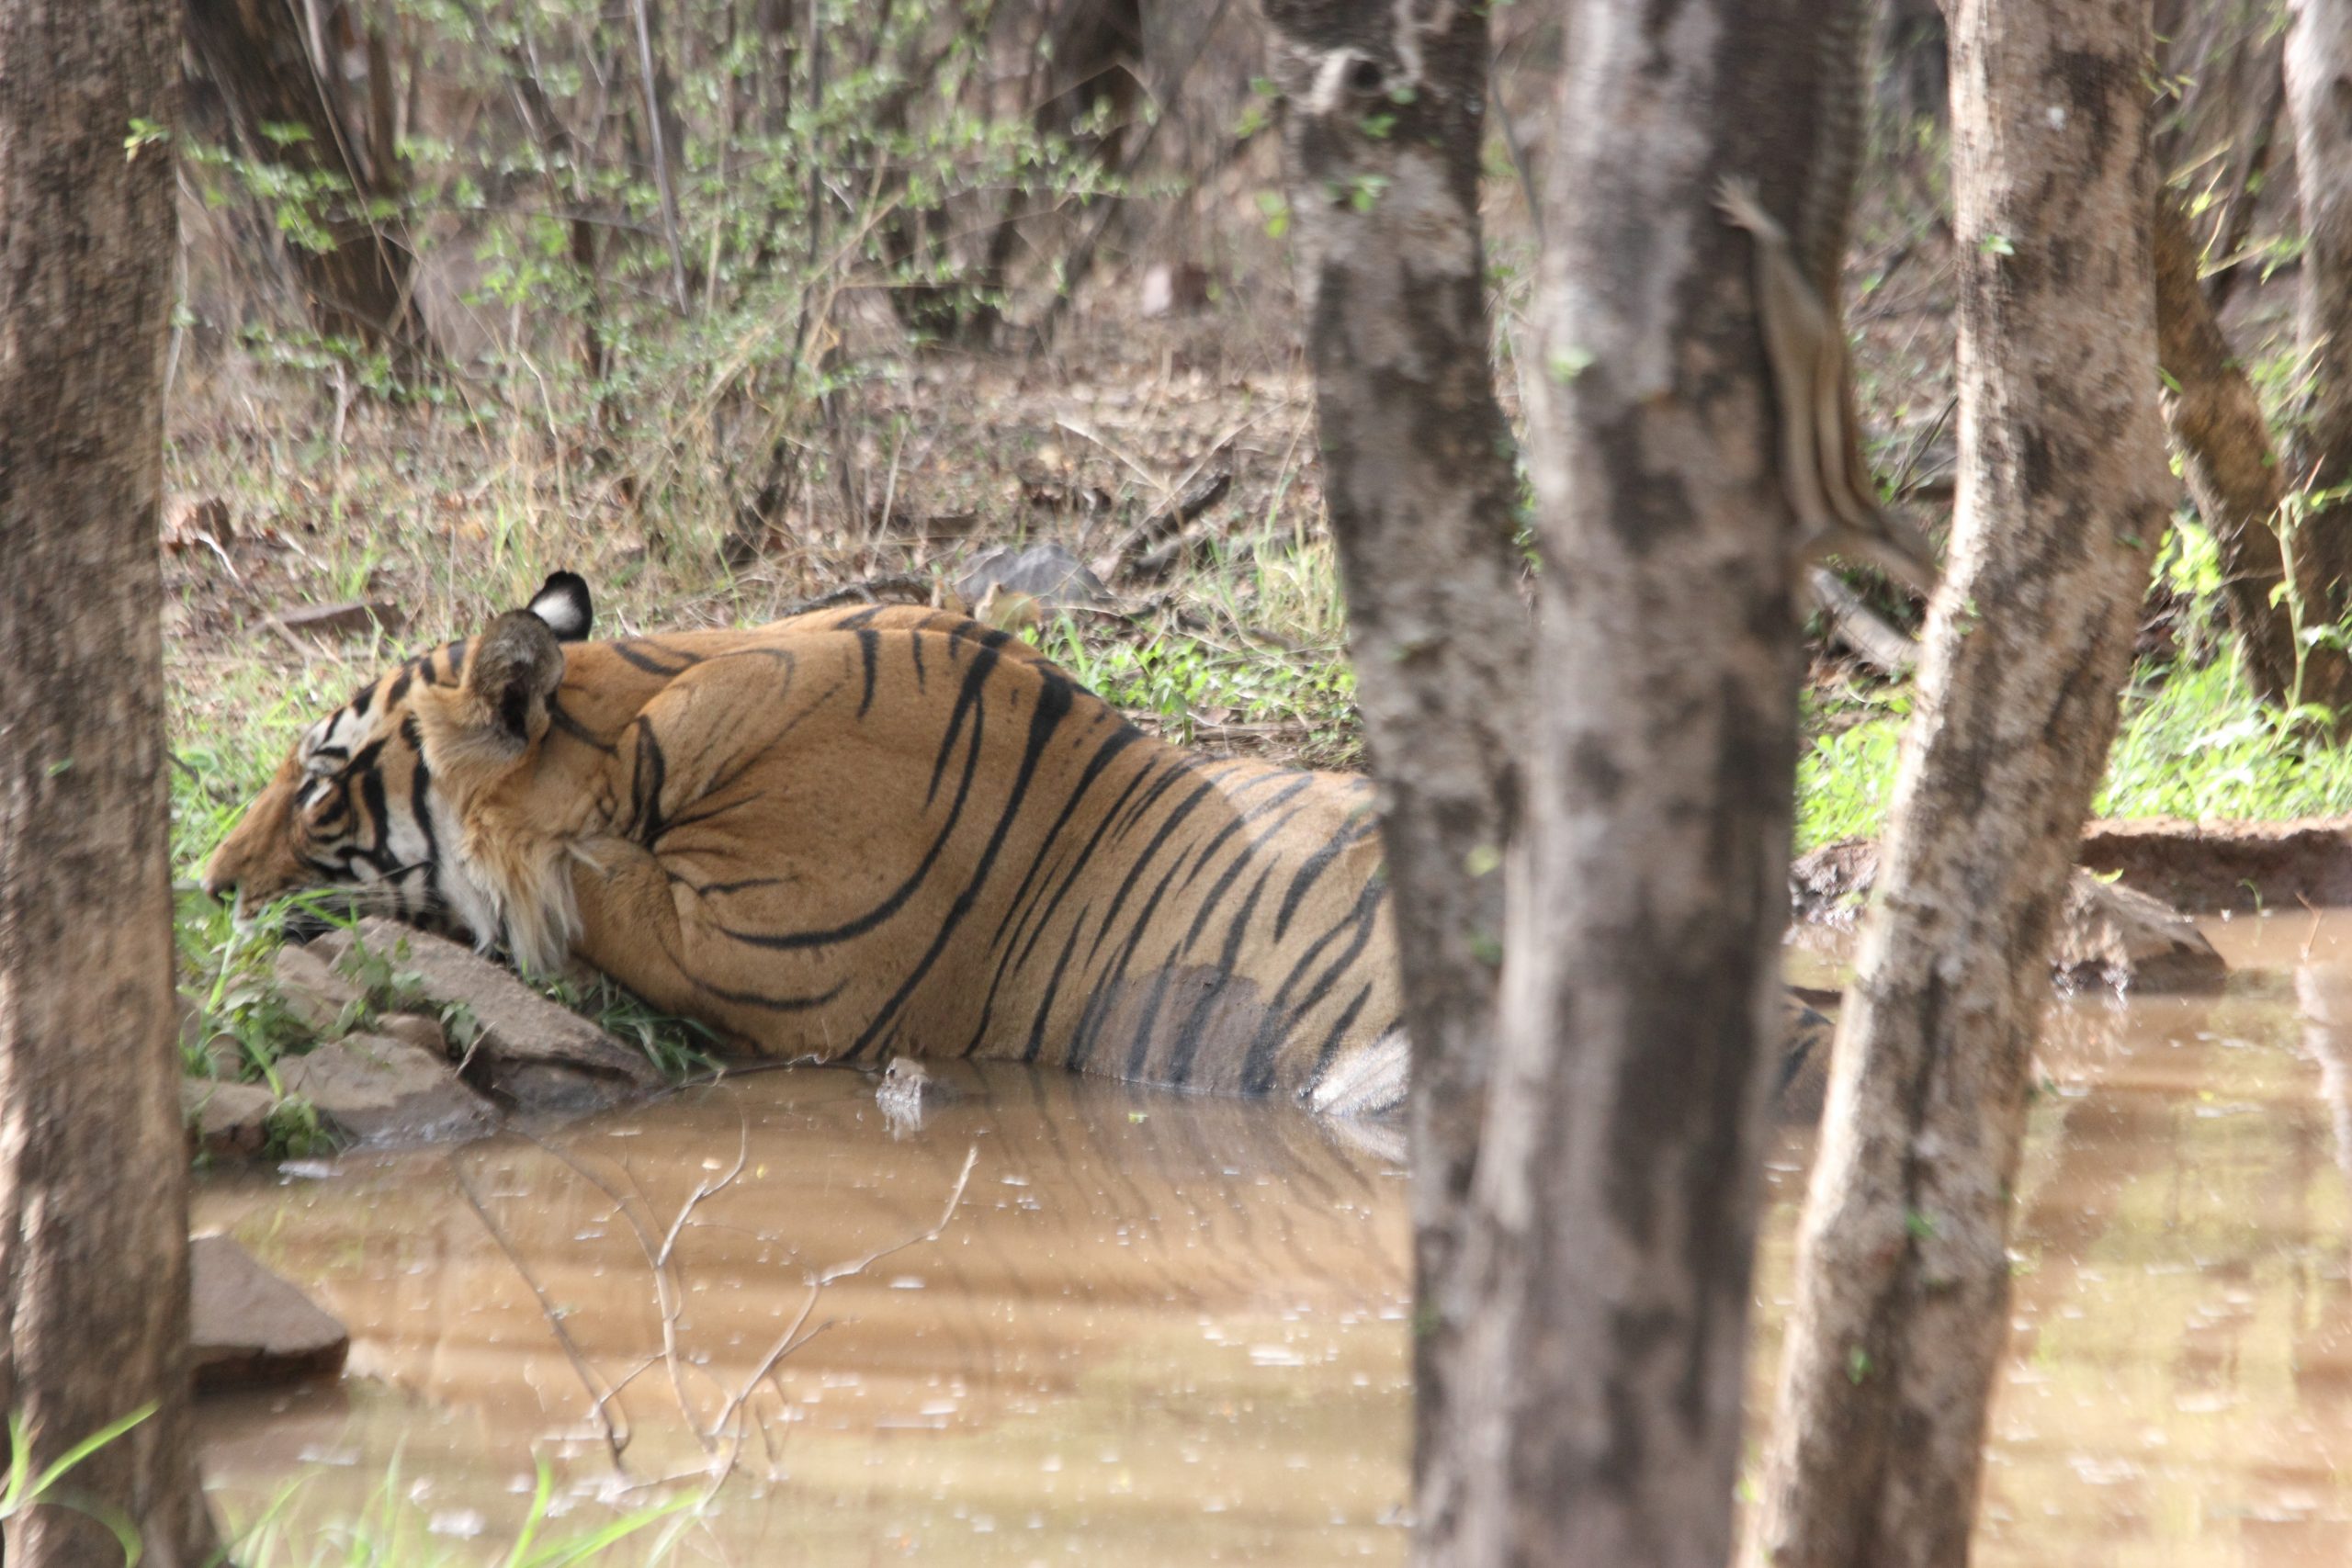 A tiger in a pond